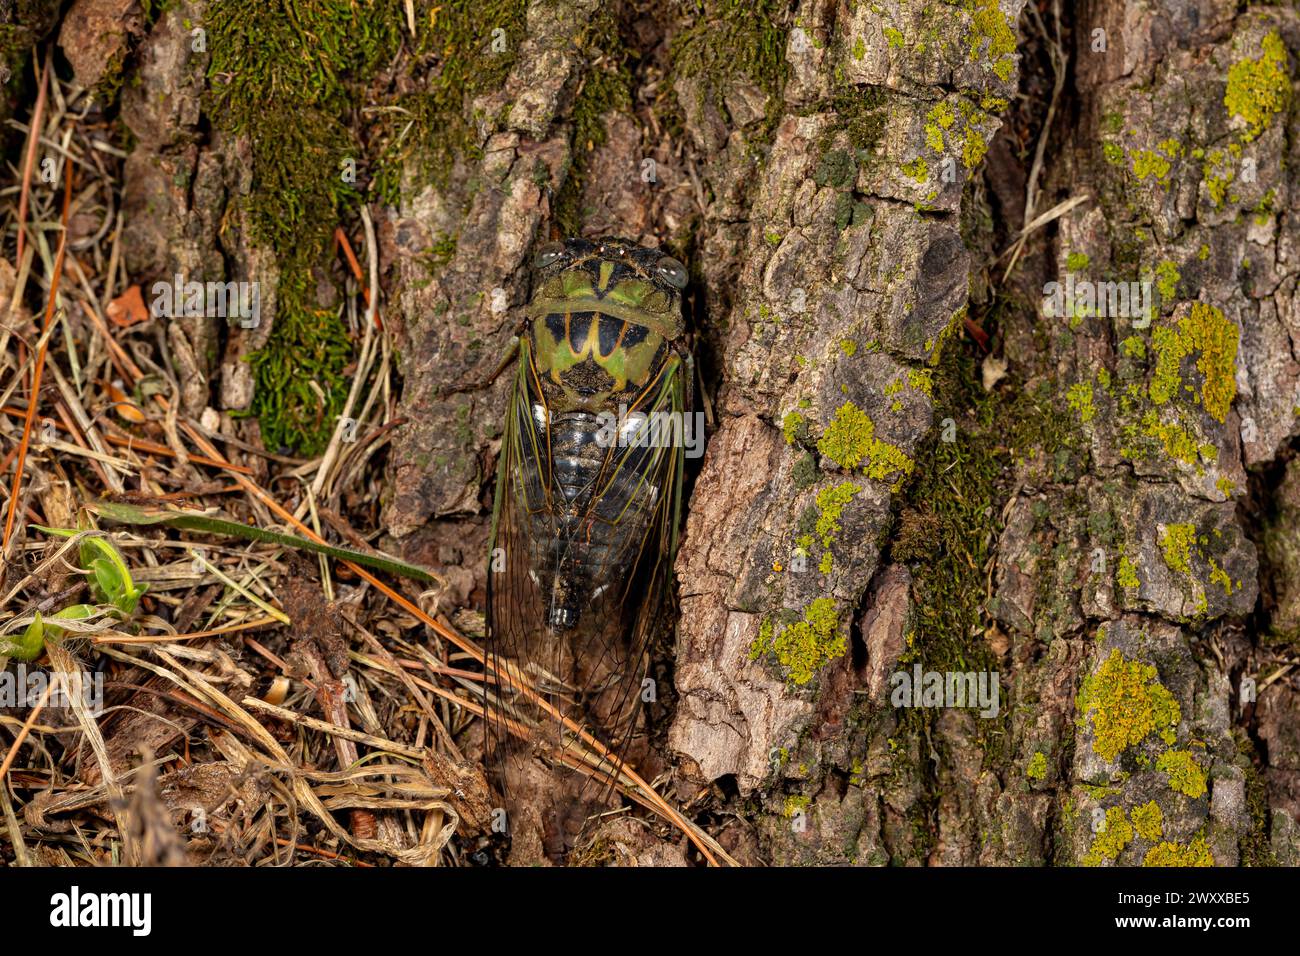 Adult annual cicada climbing tree trunk. Insect habitat, conservation and emergence concept. Stock Photo